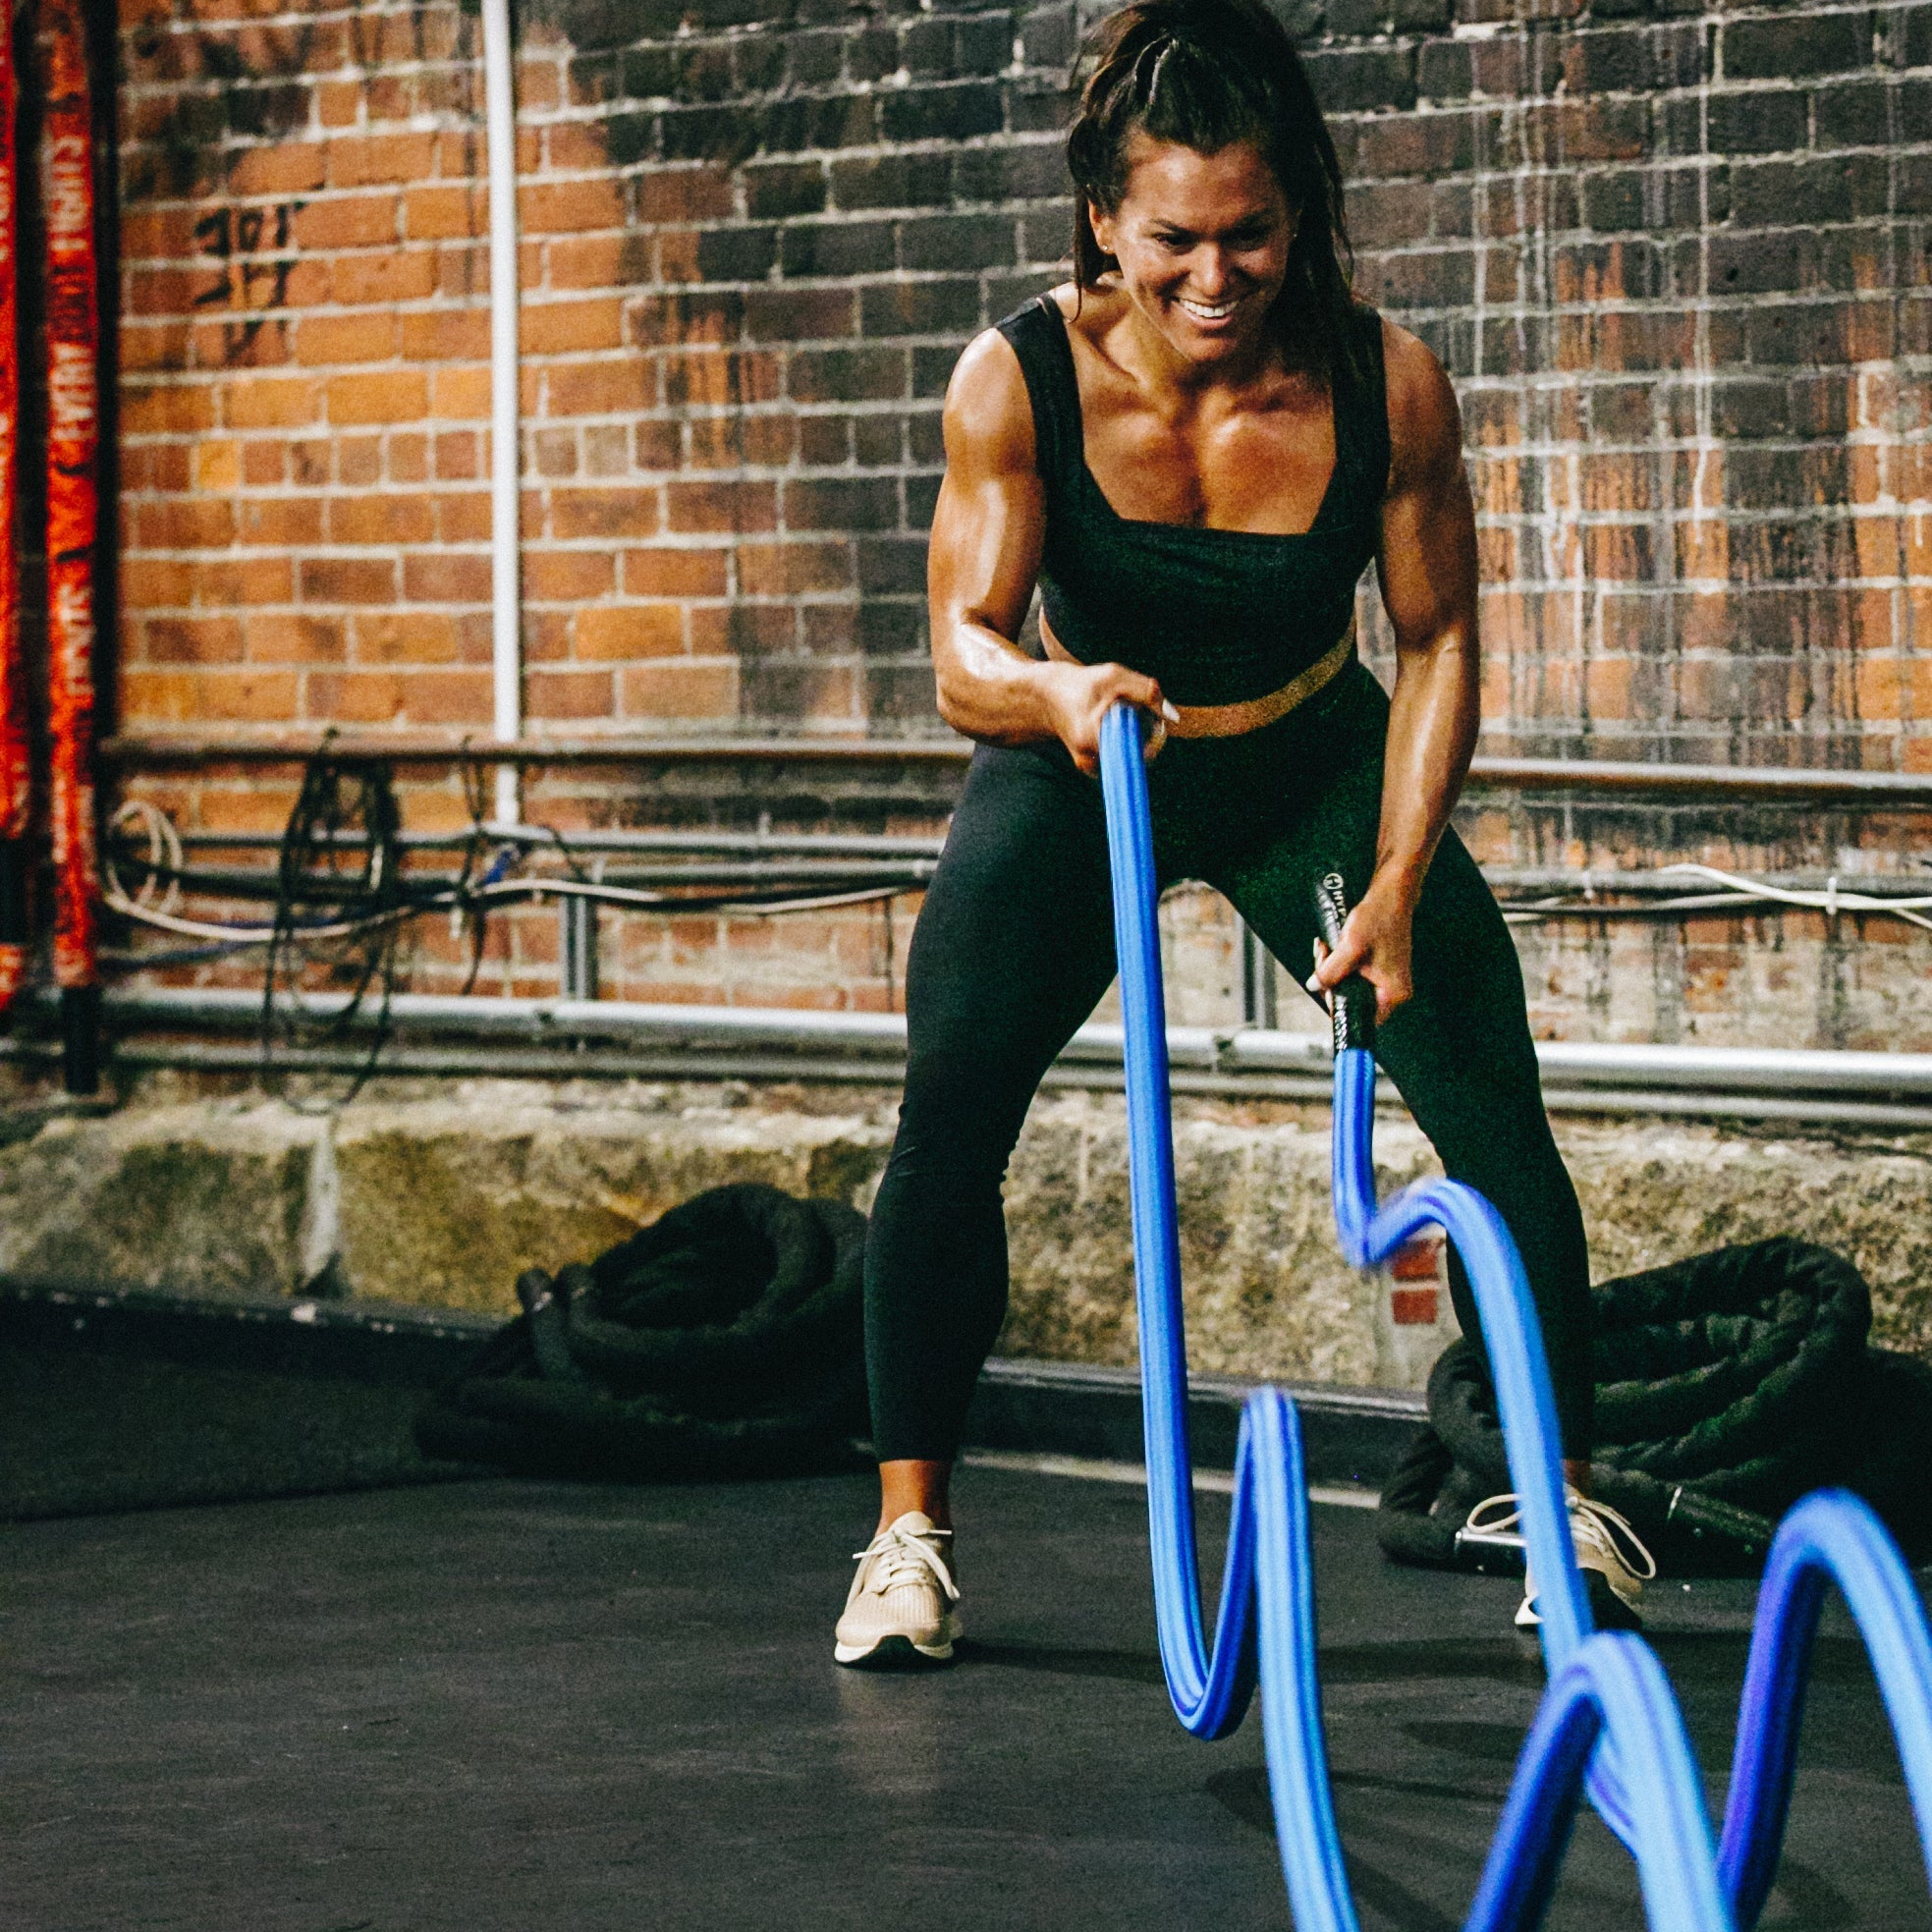 Battle Ropes Exercises for Weight Loss and Cardio » Hyperwear